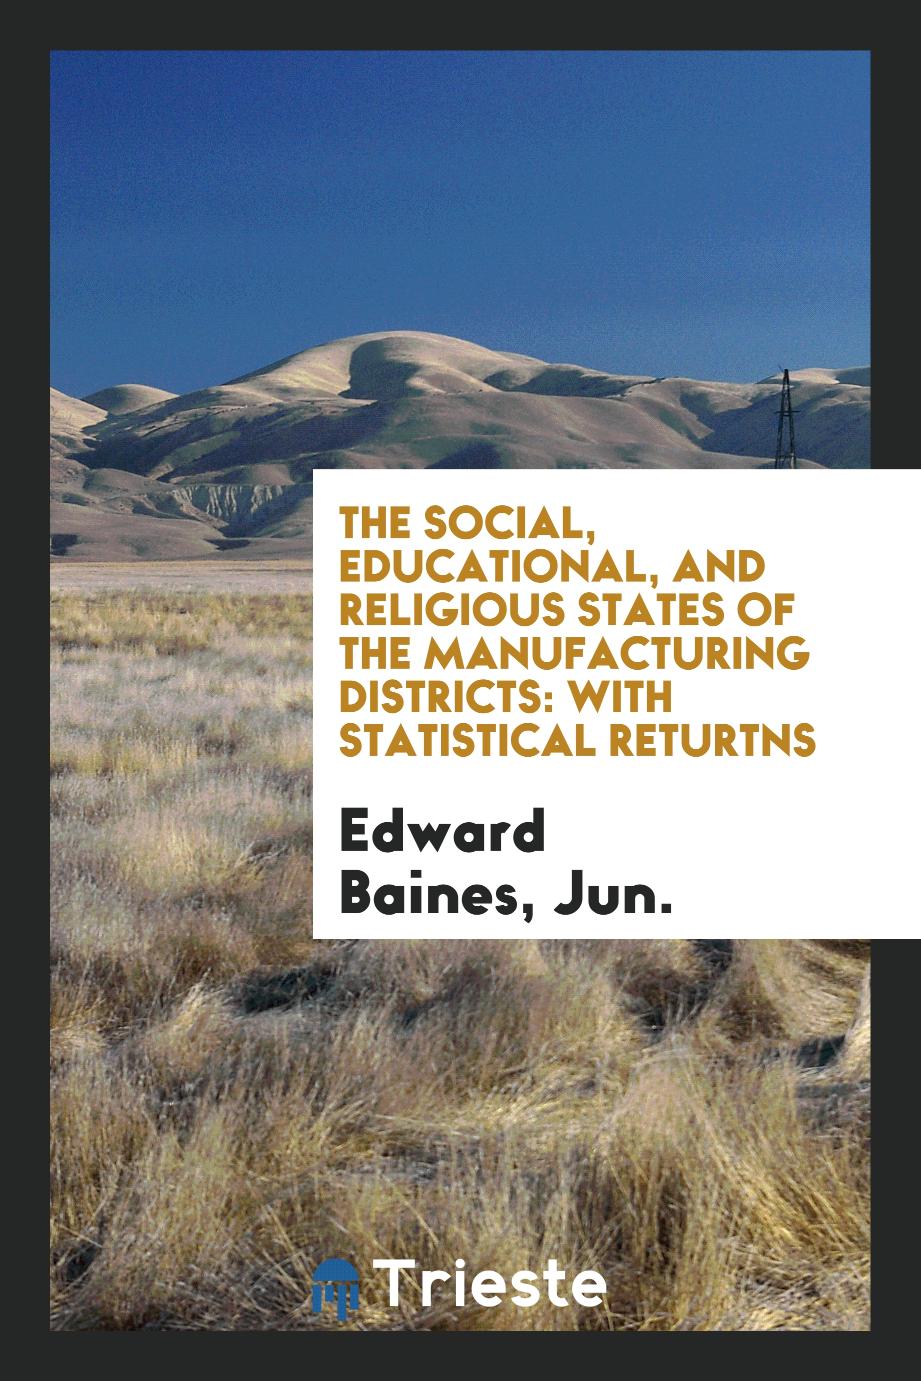 The Social, Educational, and Religious States of the Manufacturing Districts: With Statistical Returns